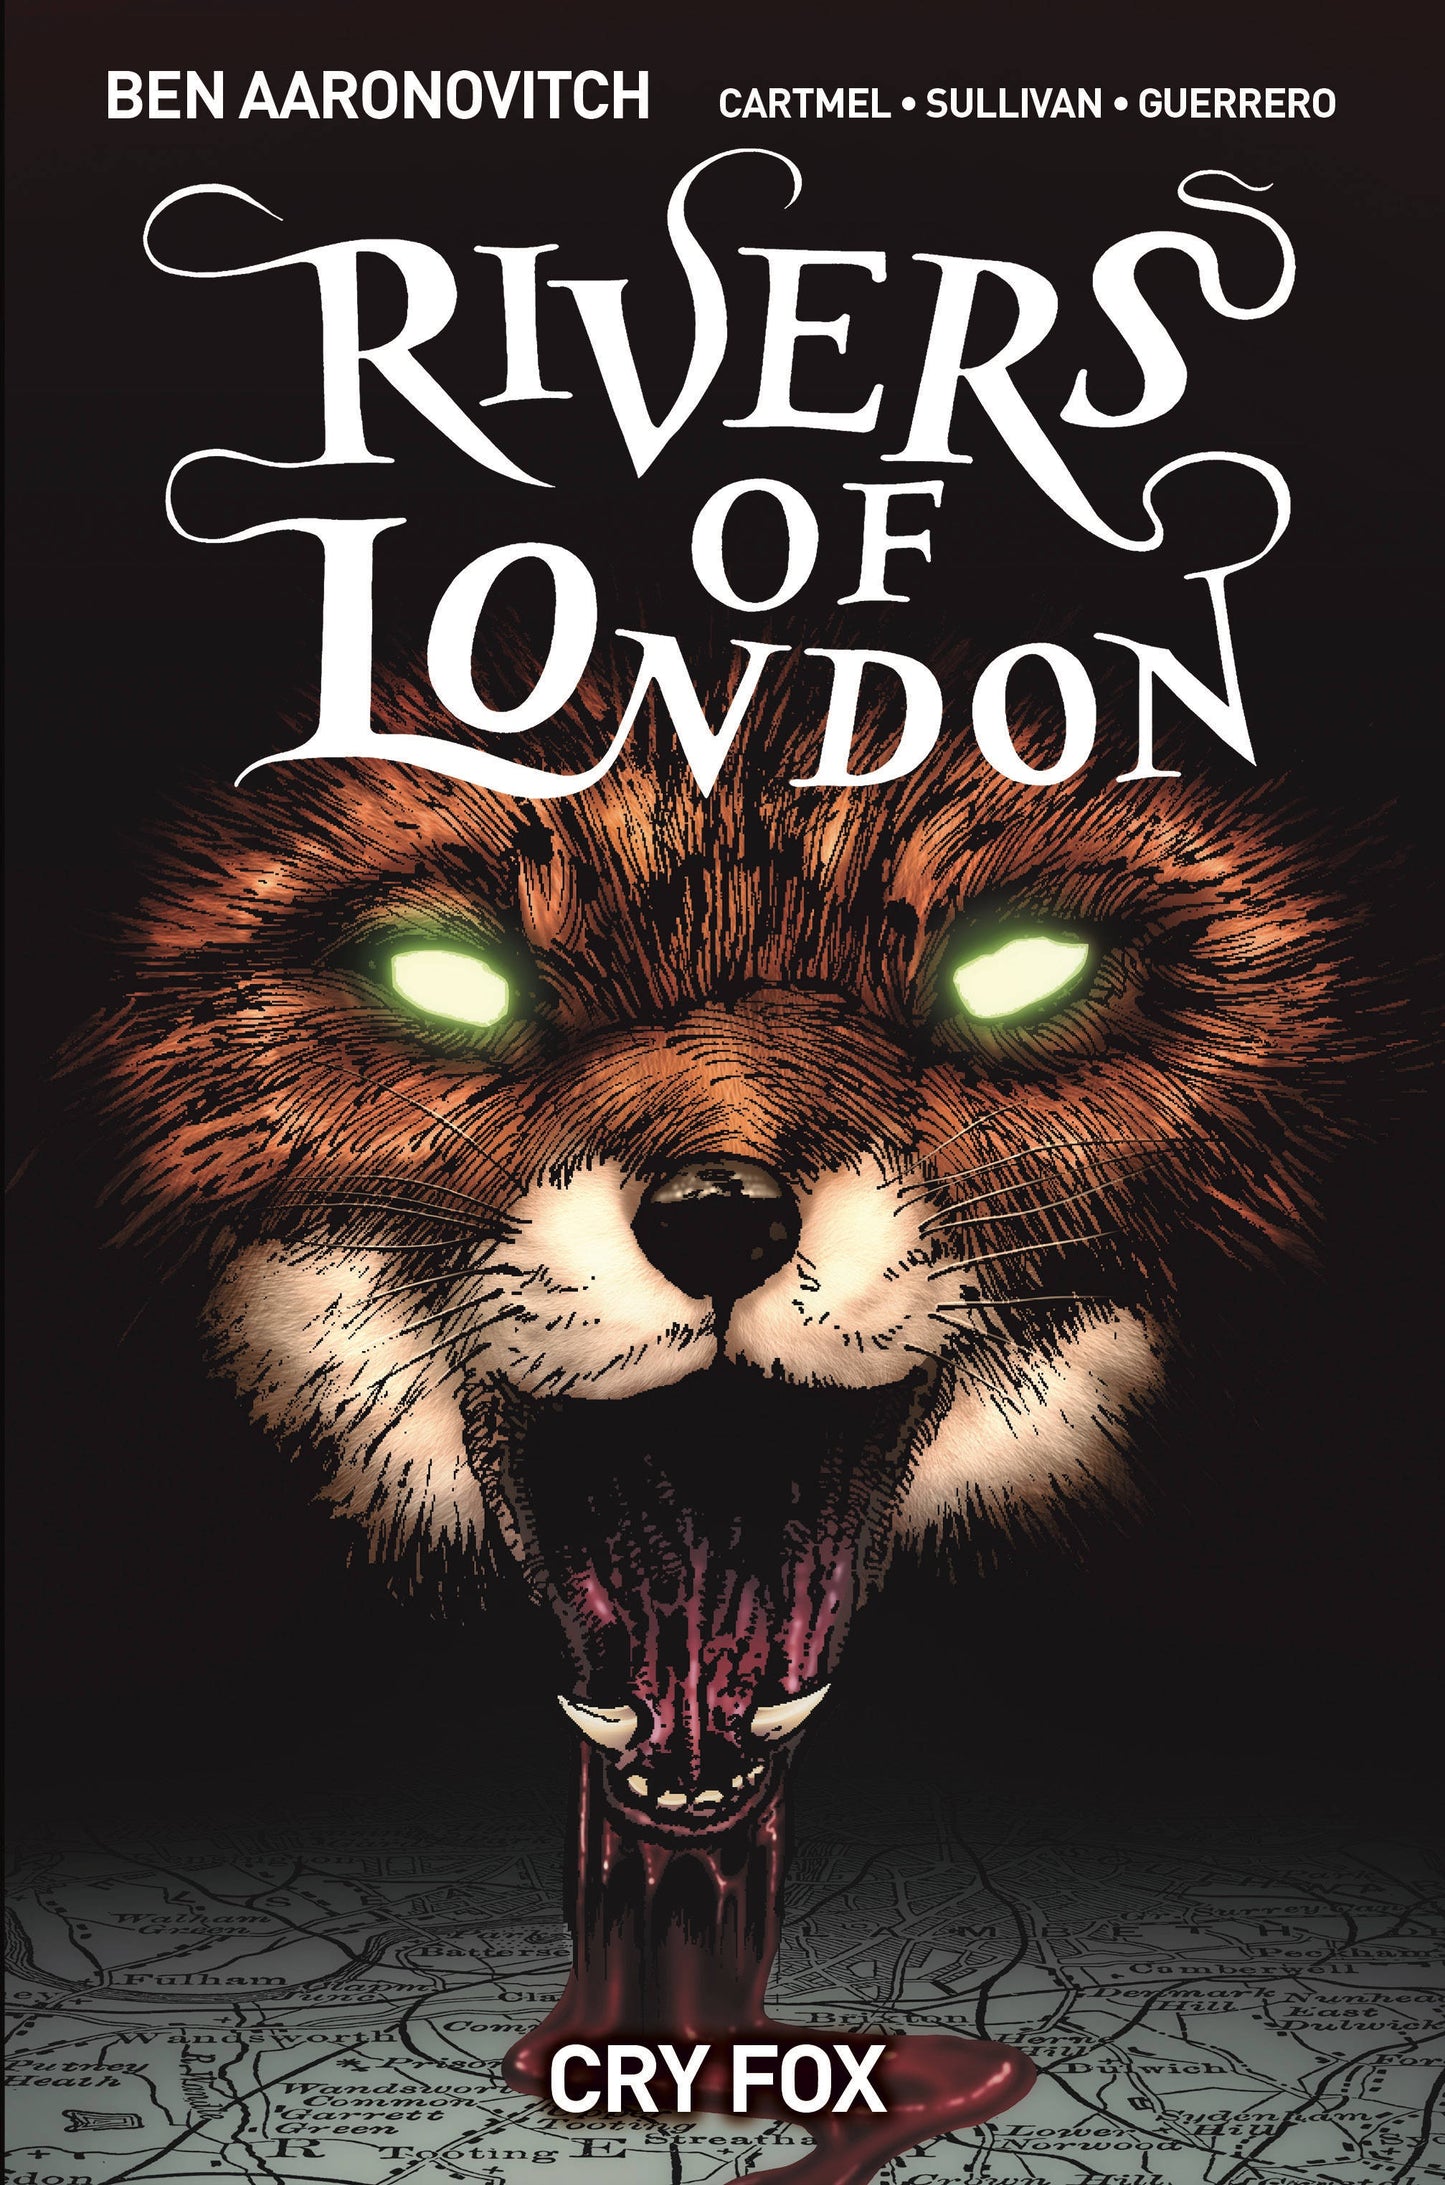 RIVERS OF LONDON CRY FOX